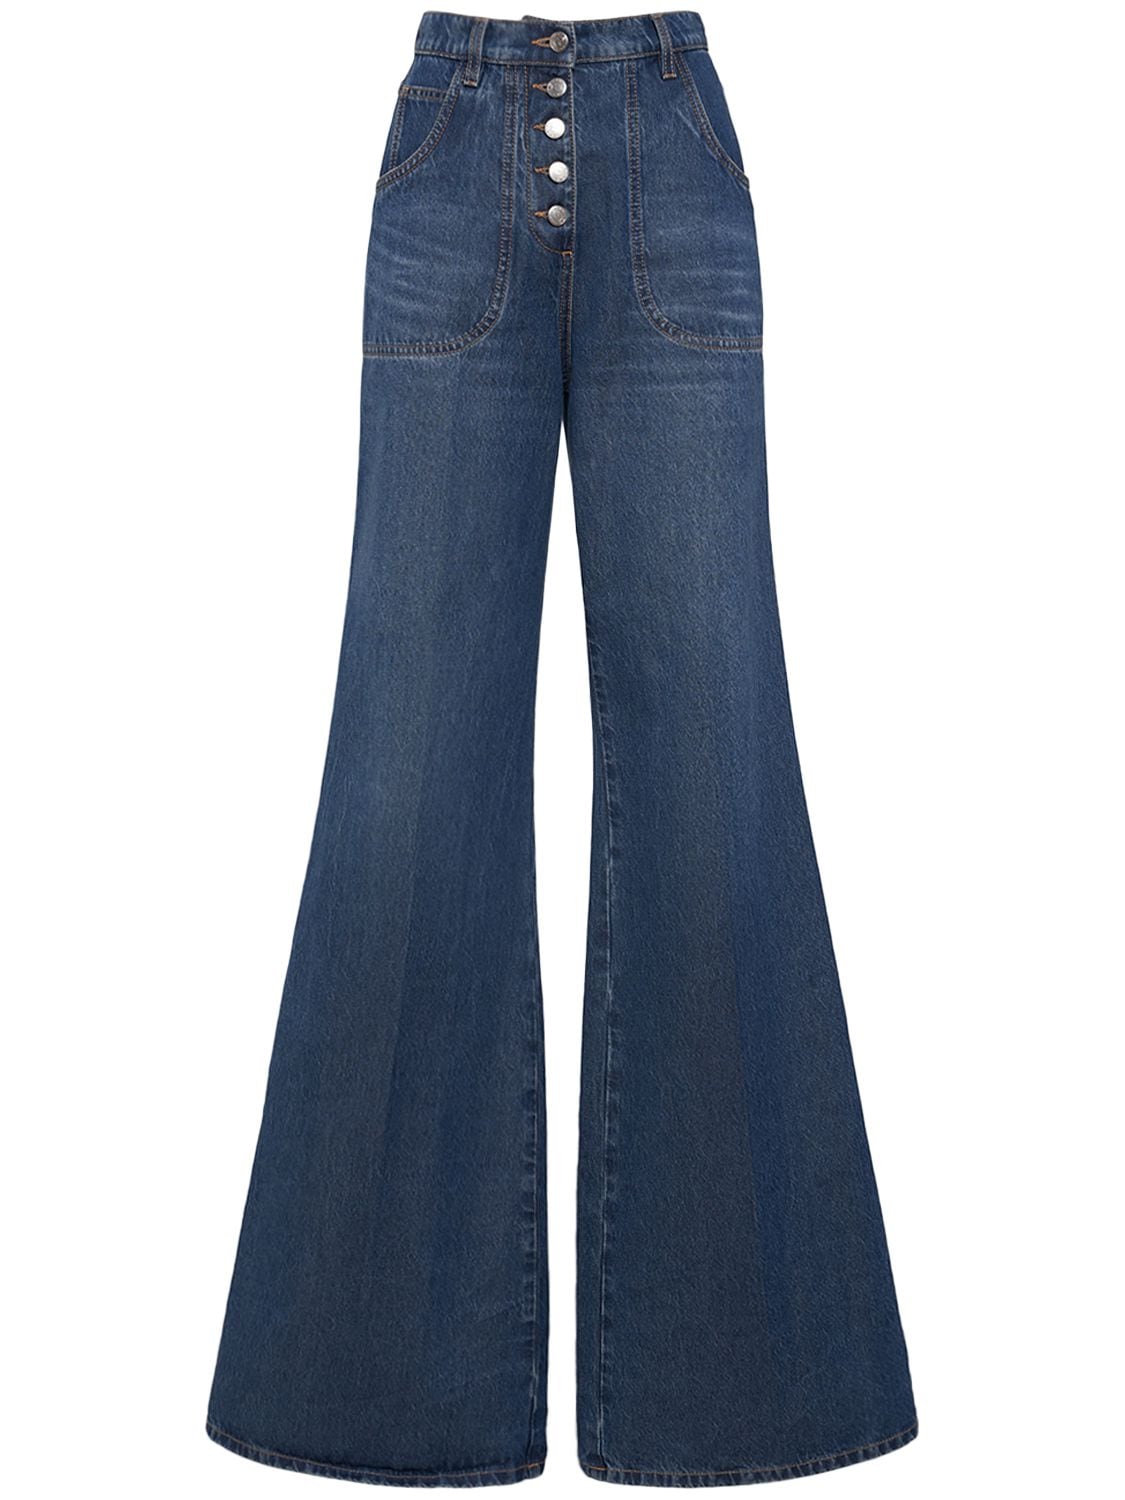 Image of Embroidered Denim Flared Jeans